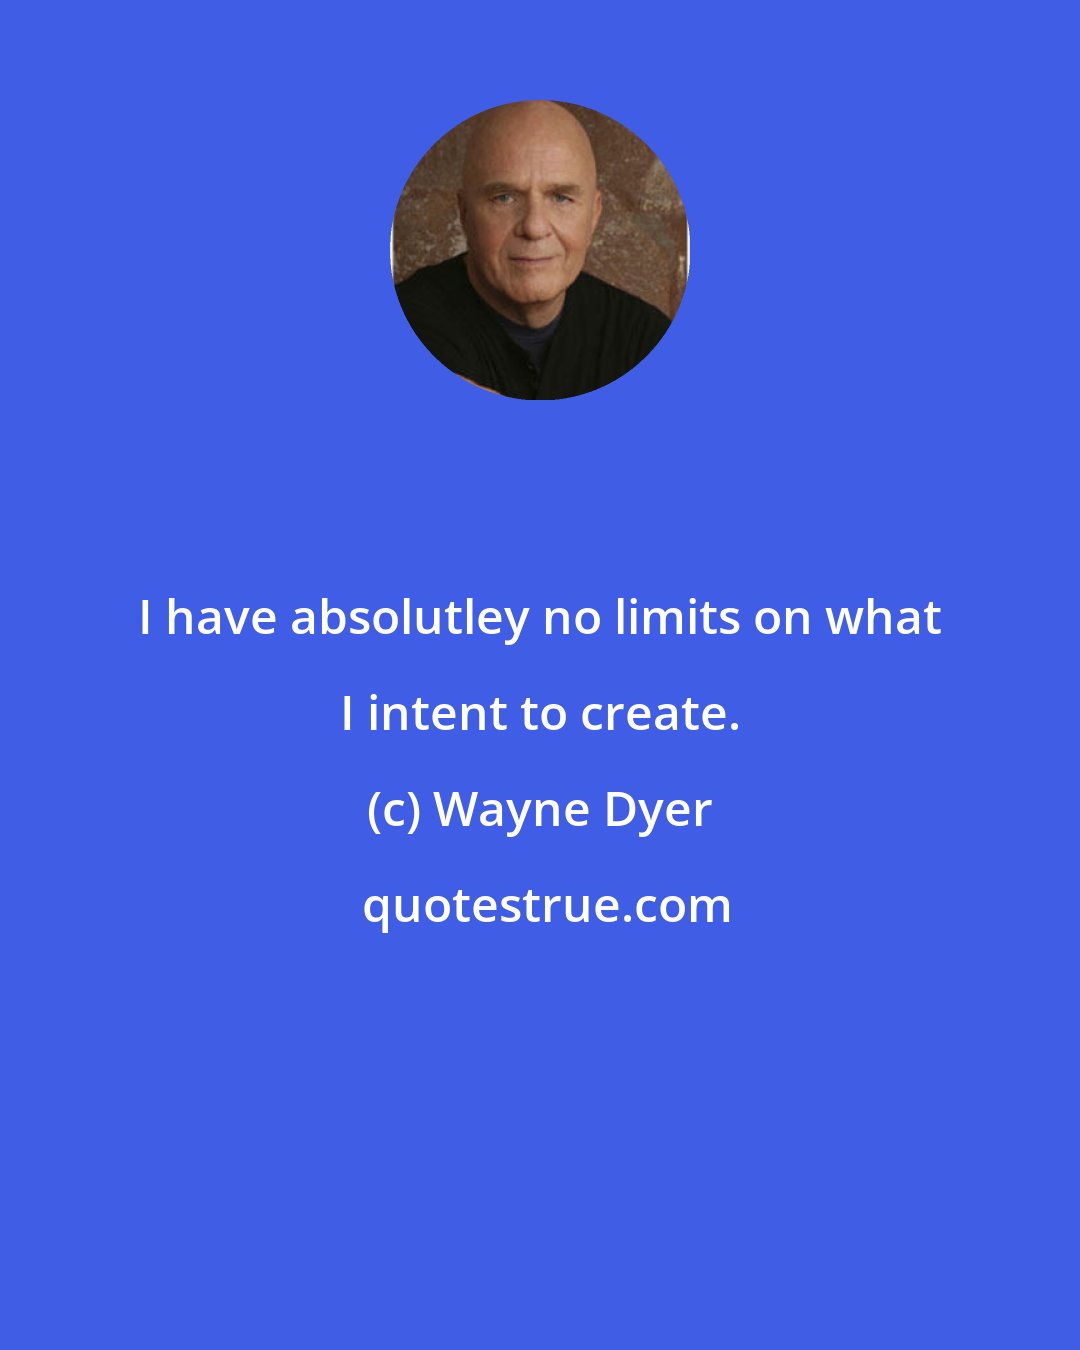 Wayne Dyer: I have absolutley no limits on what I intent to create.